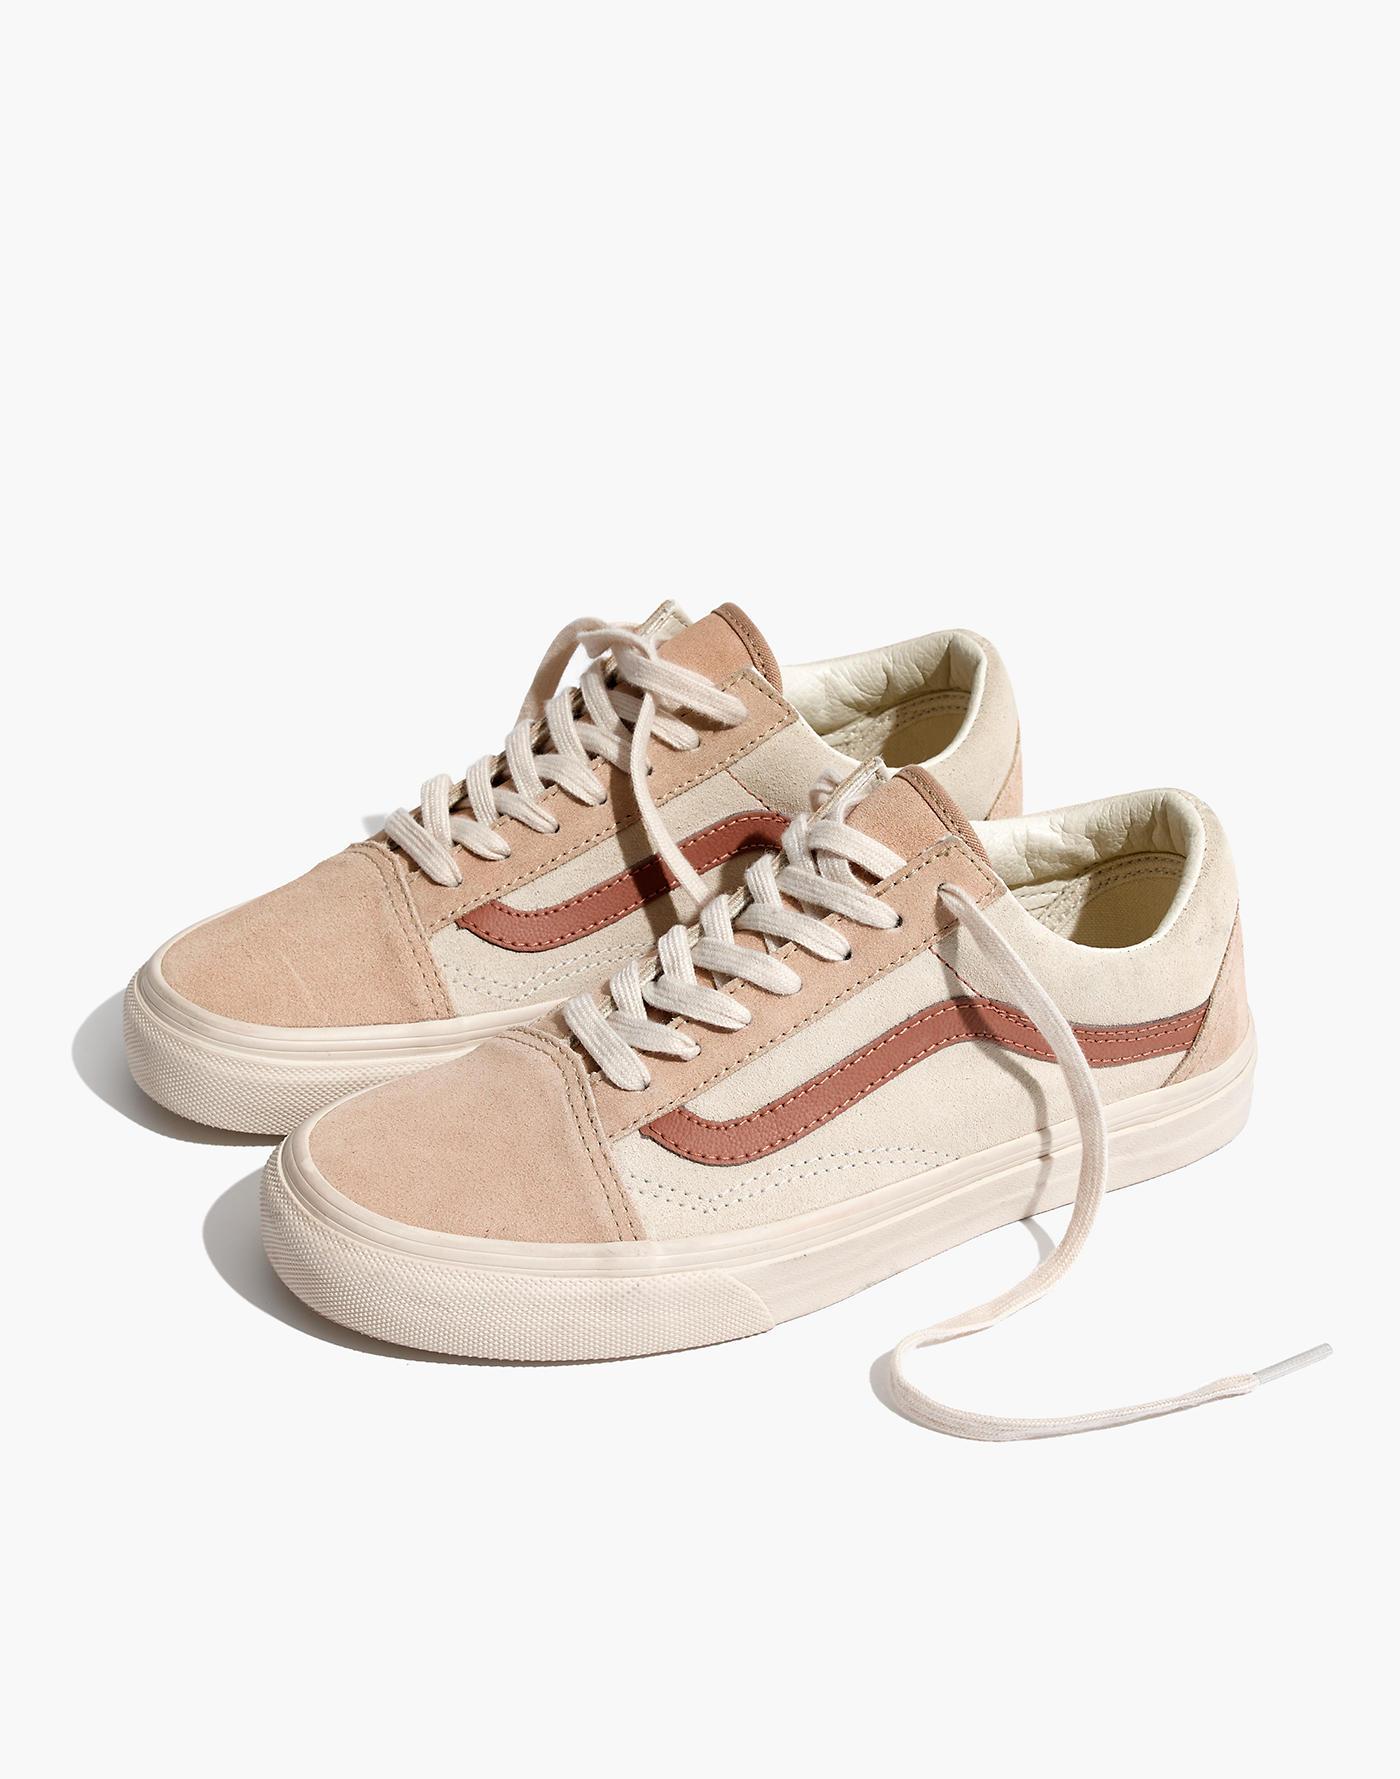 Madewell X Vans Unisex Old Skool Lace-up Sneakers In Camel Colorblock in  Natural | Lyst